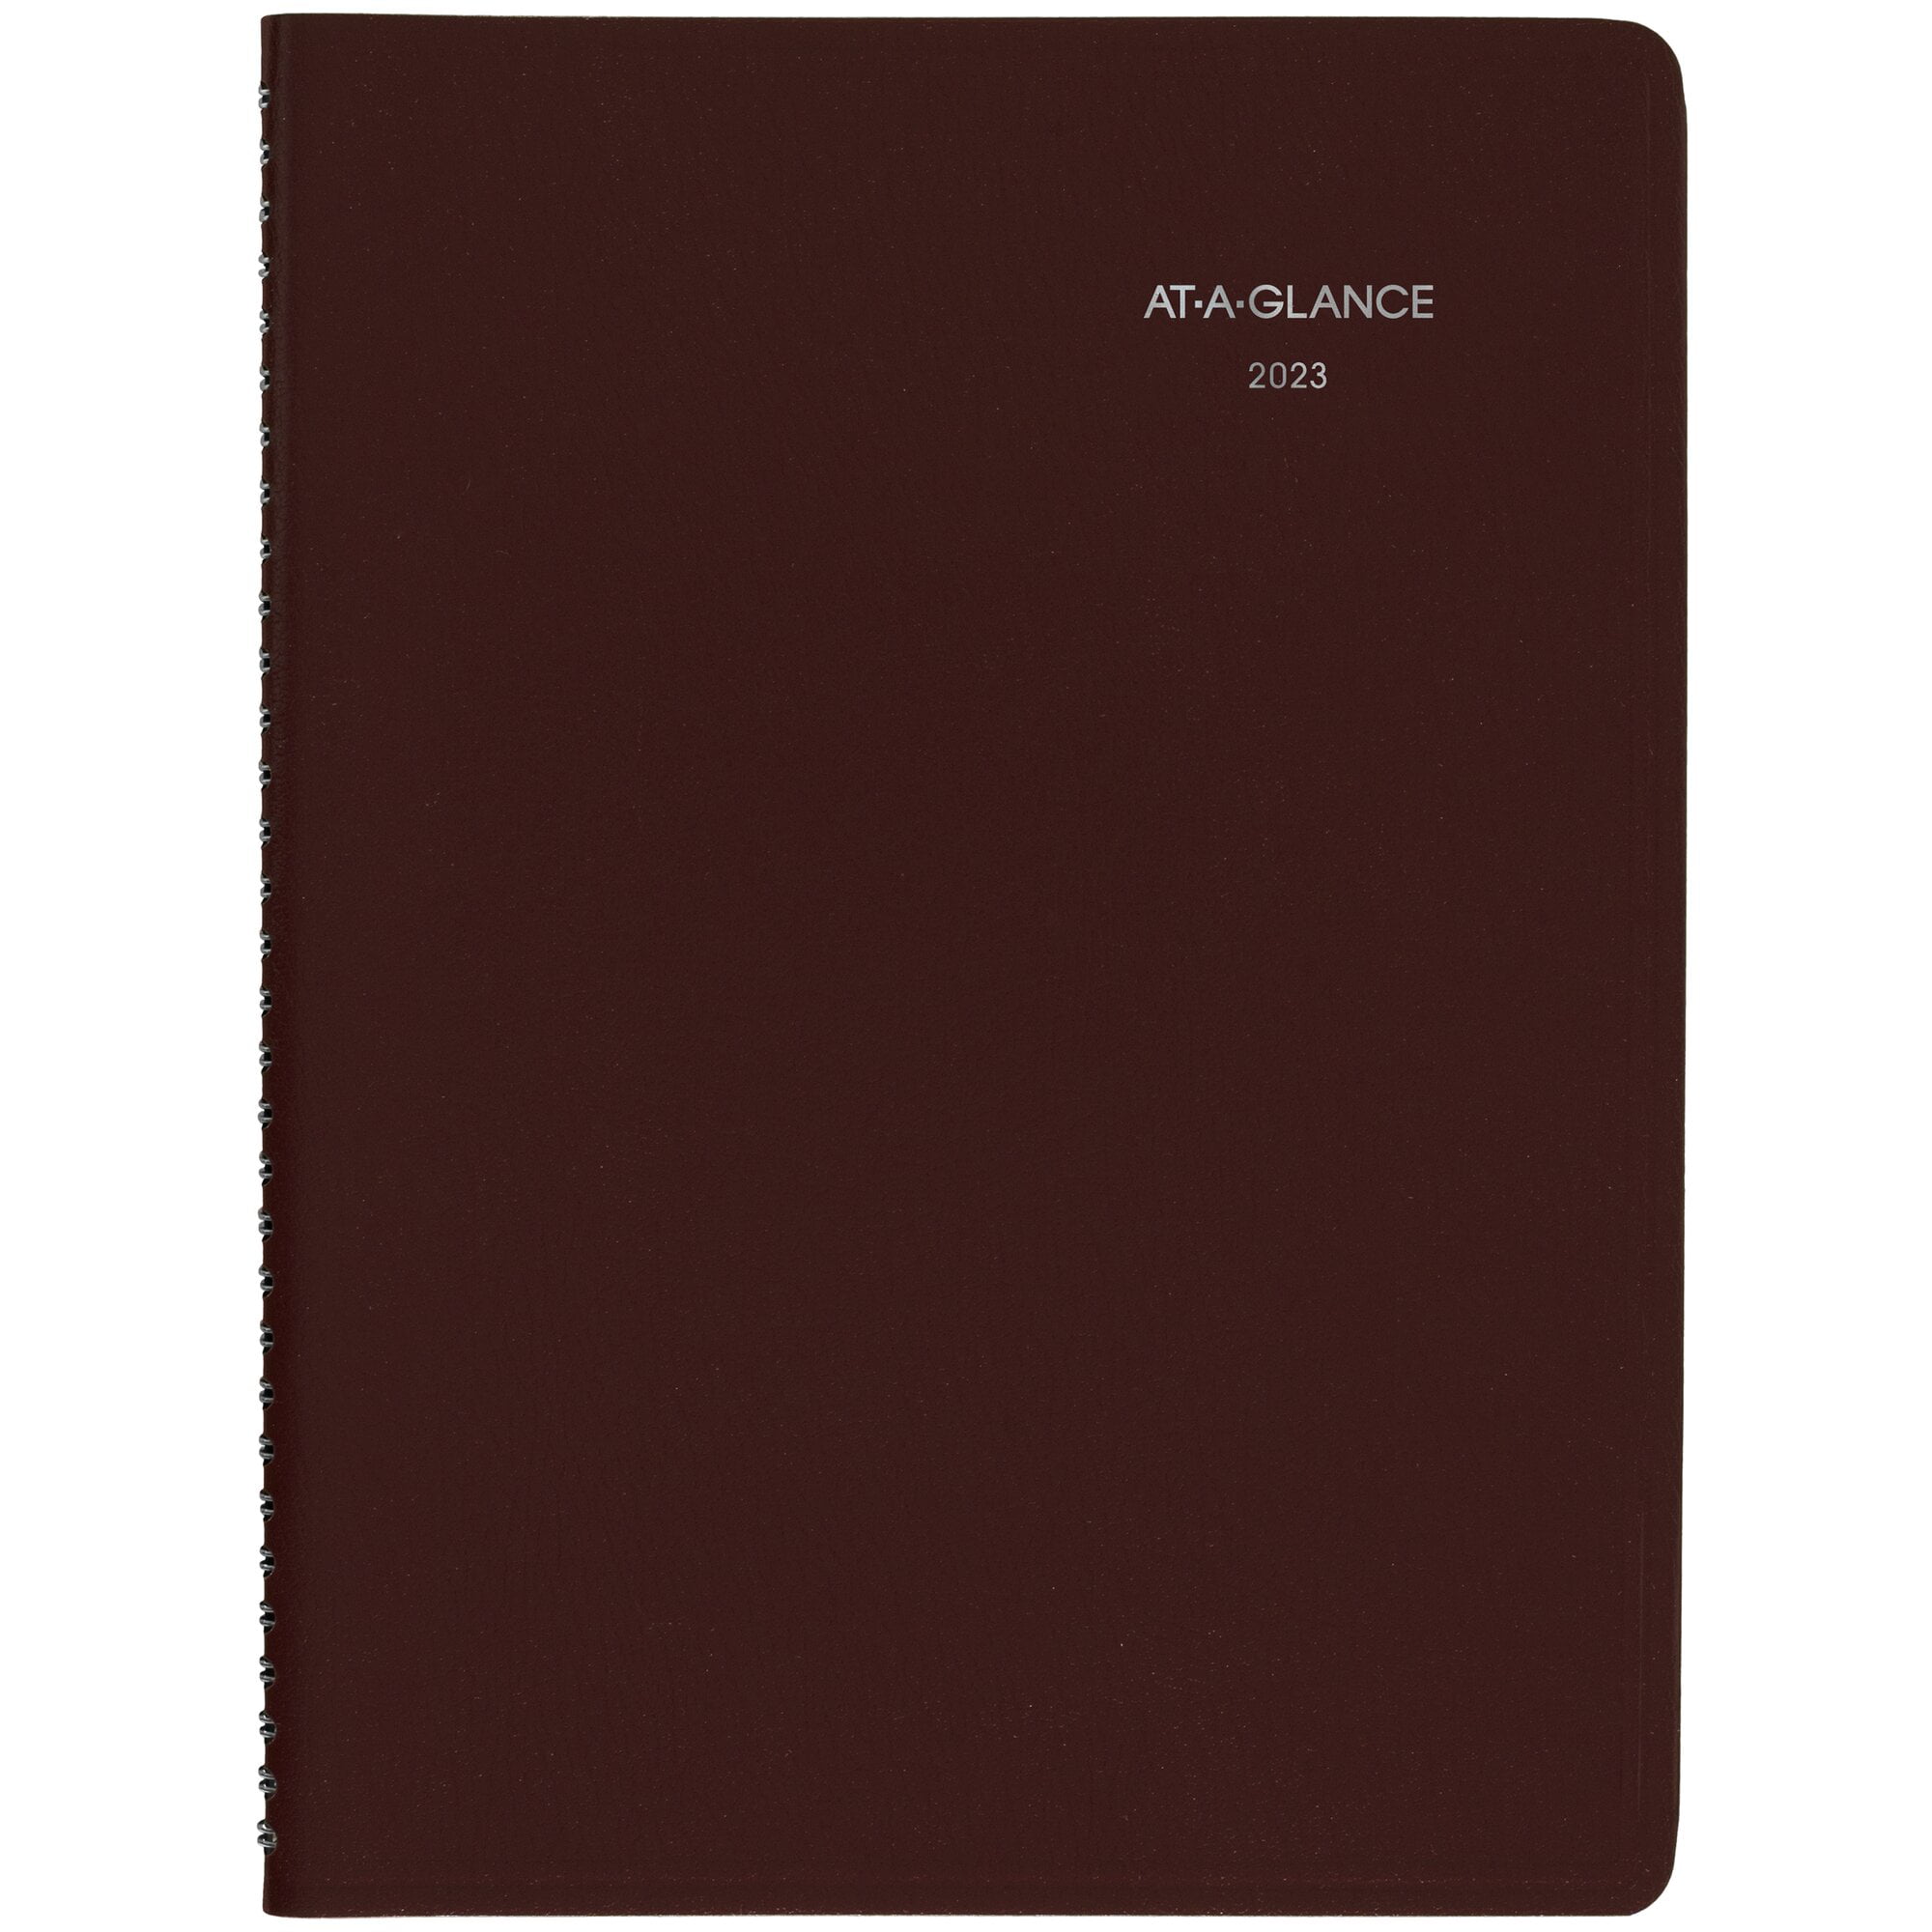 Large, 8" x 11" DayMinder AT-A-GLANCE 2020 Weekly Appointment Book/Planner 